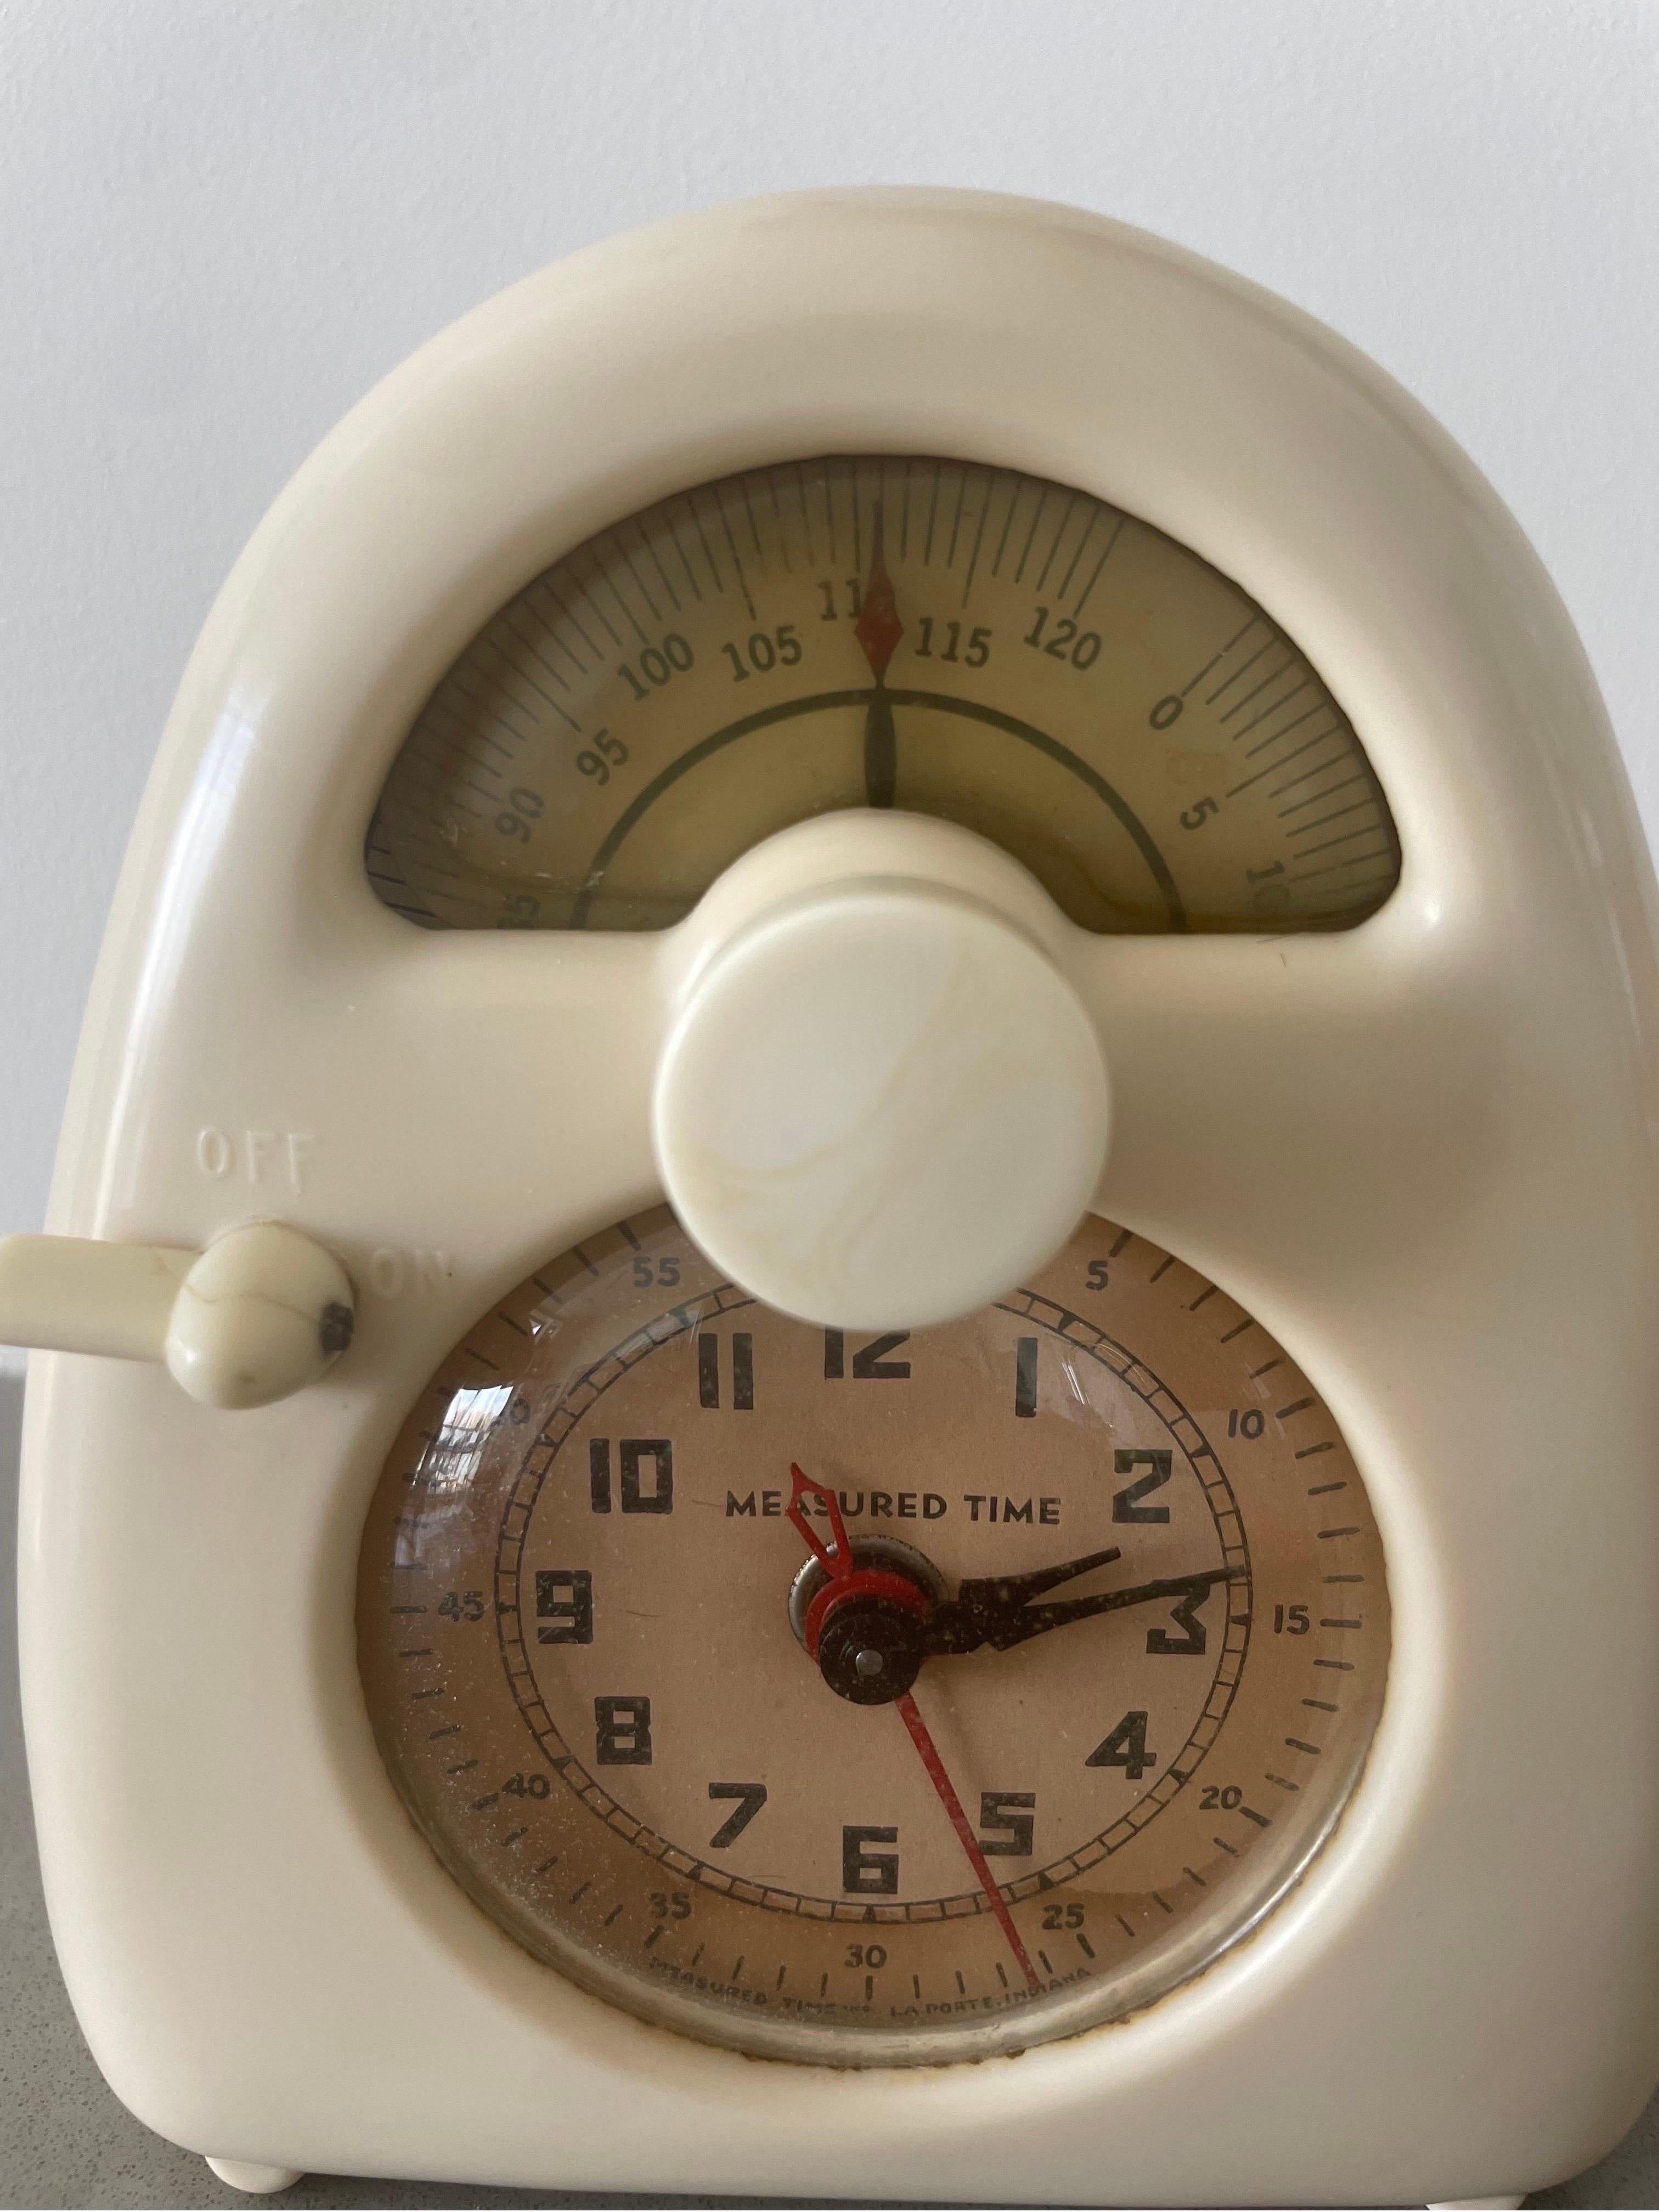 1932 Isamu Noguchi “Measured Time” Hawkeye Clock  In Good Condition For Sale In New York, NY